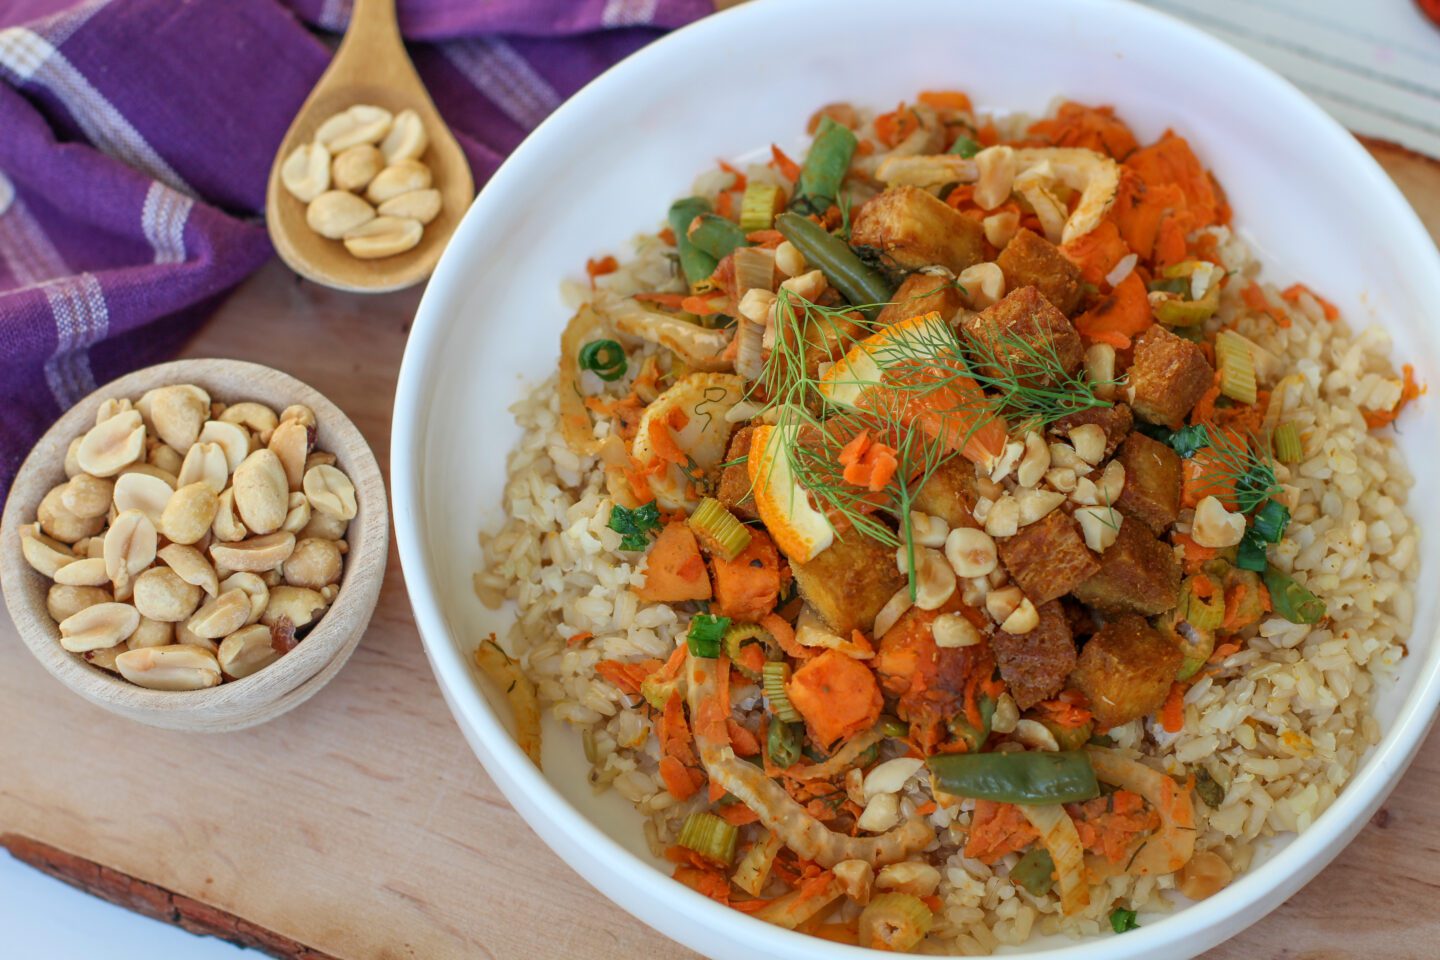 Curried_Tofu_Colorful_Vegetables_and_Orange_Rice_